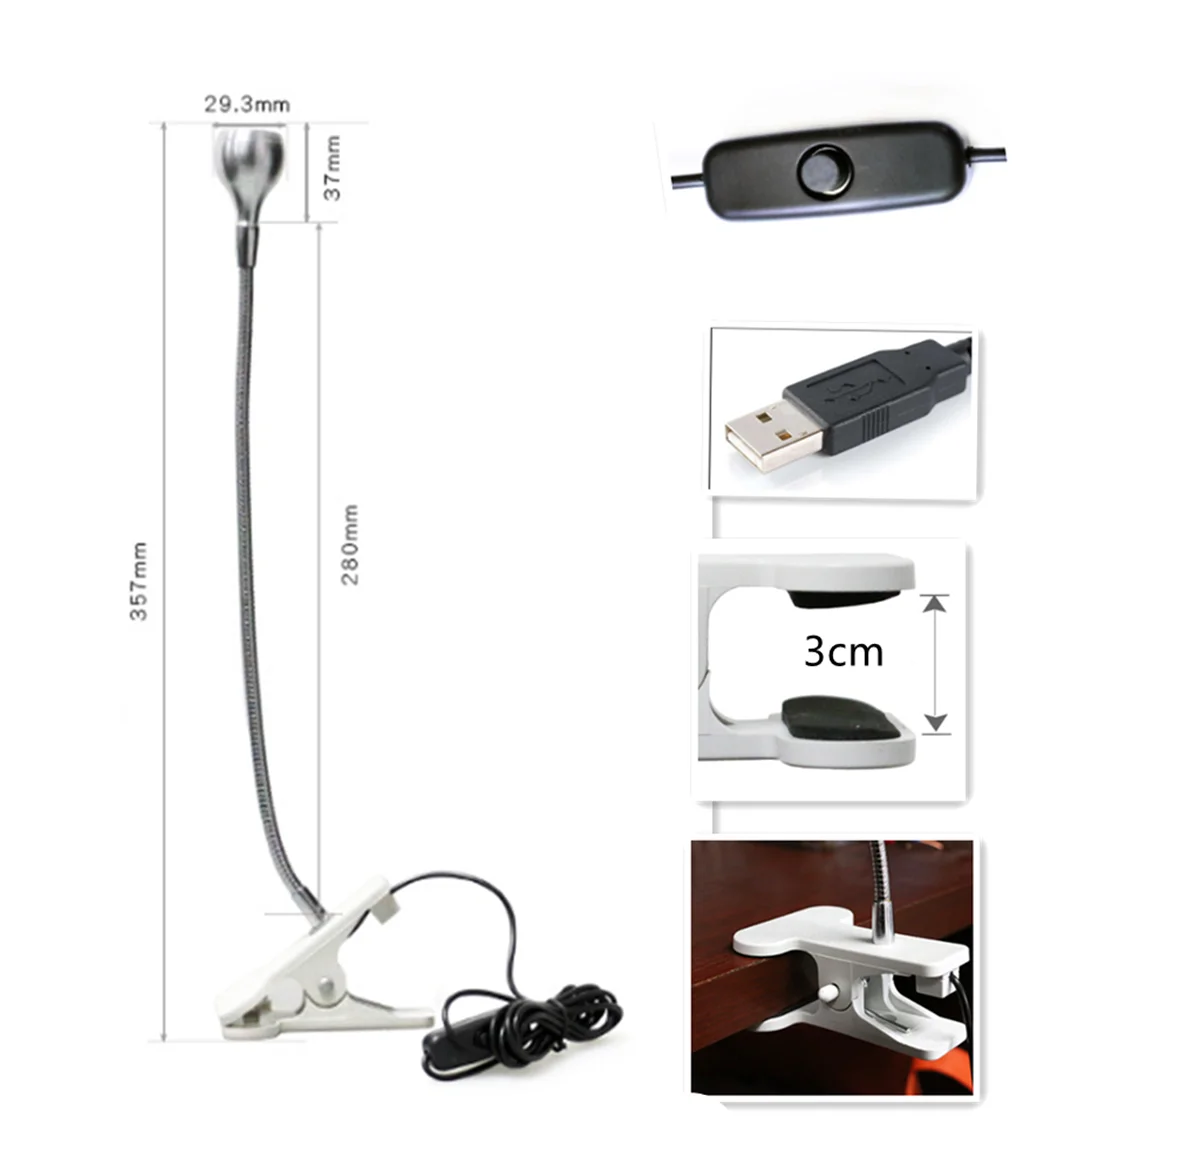 Buy USB Ultraviolet Curing Lamp LED white Gooseneck Light with Clamp UV Fixtur on